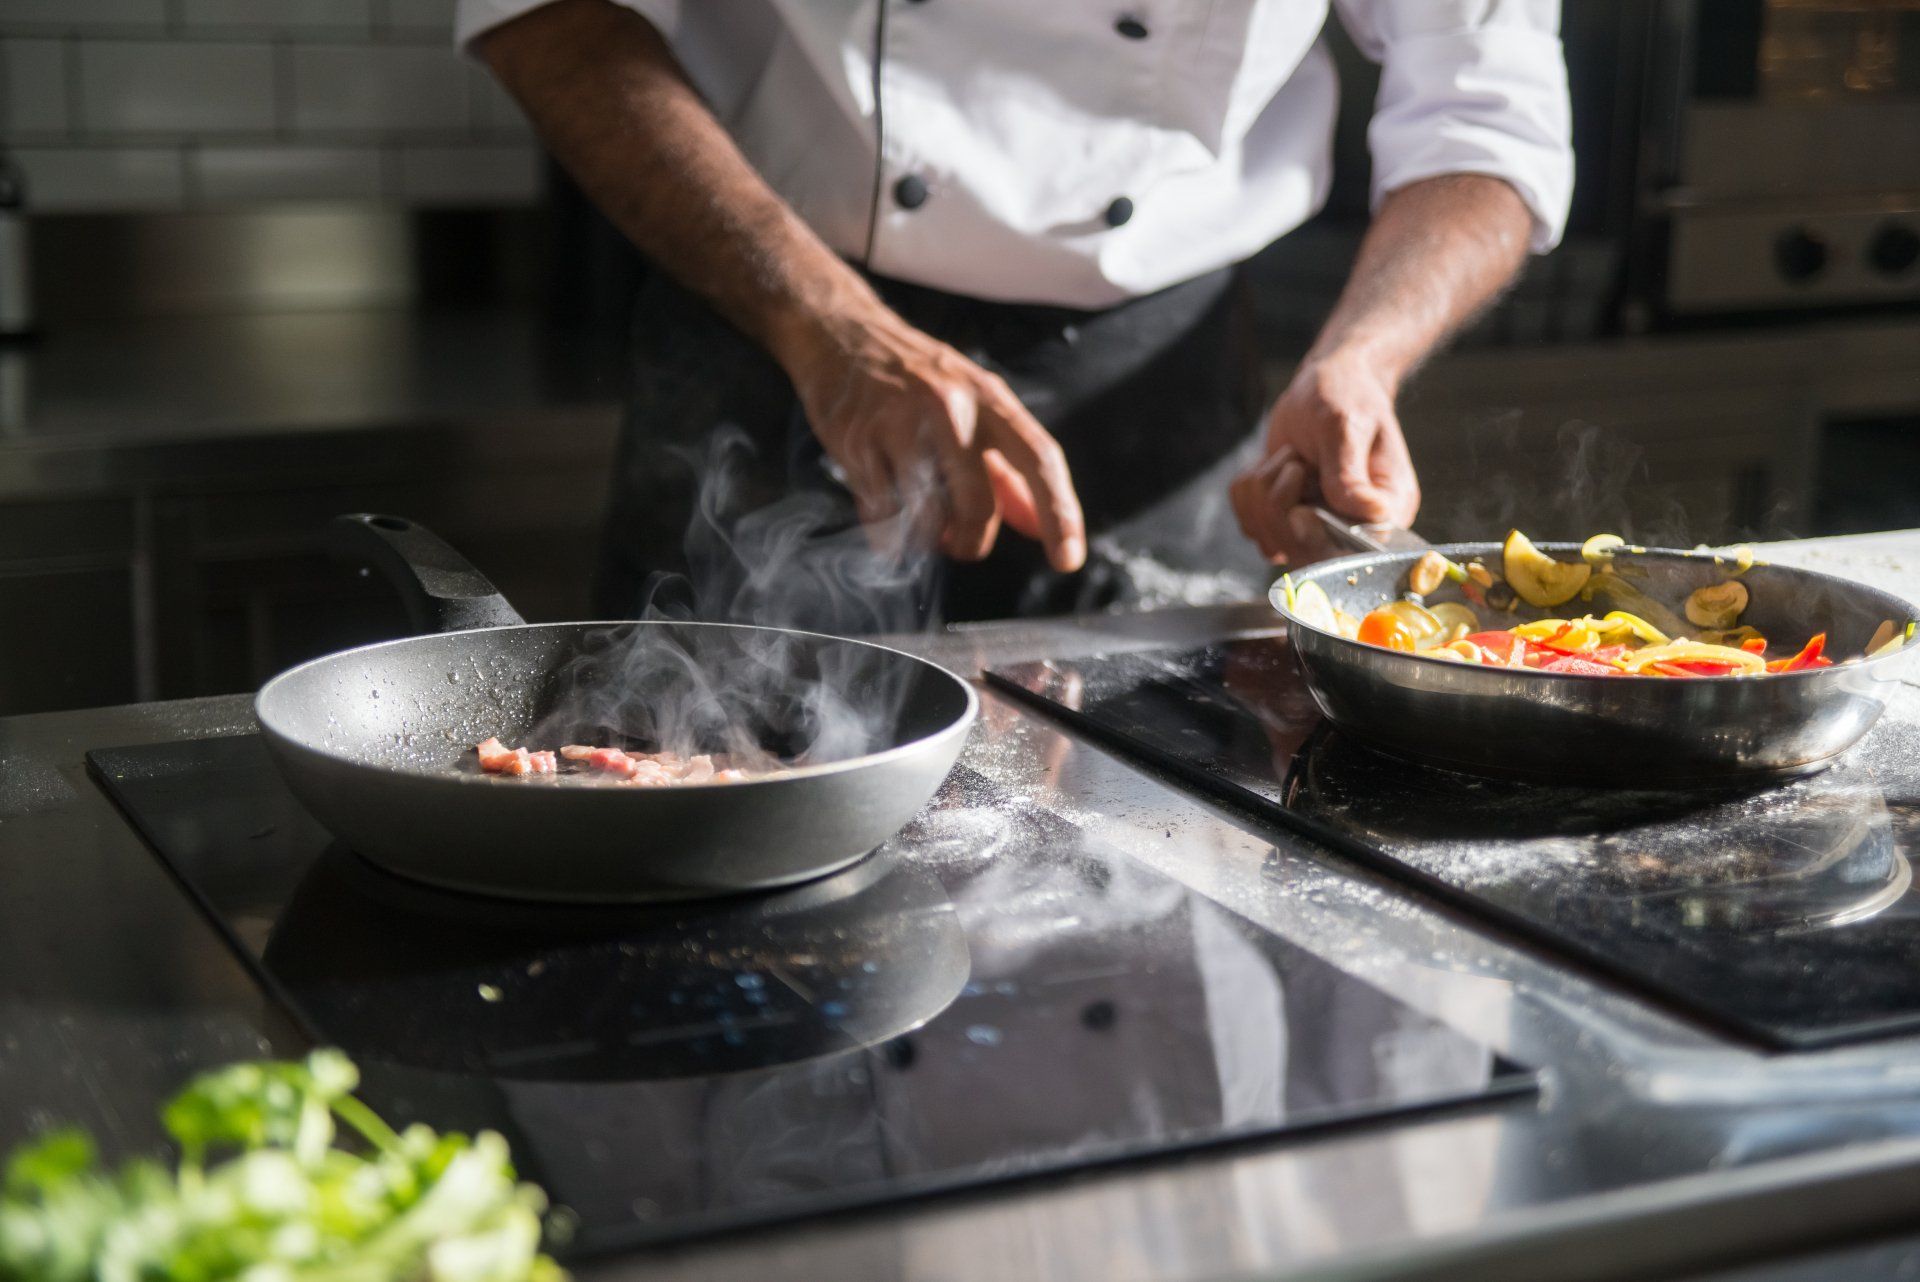 A frying pan is a flat-bottomed cooking pan used to cook food using direct heat